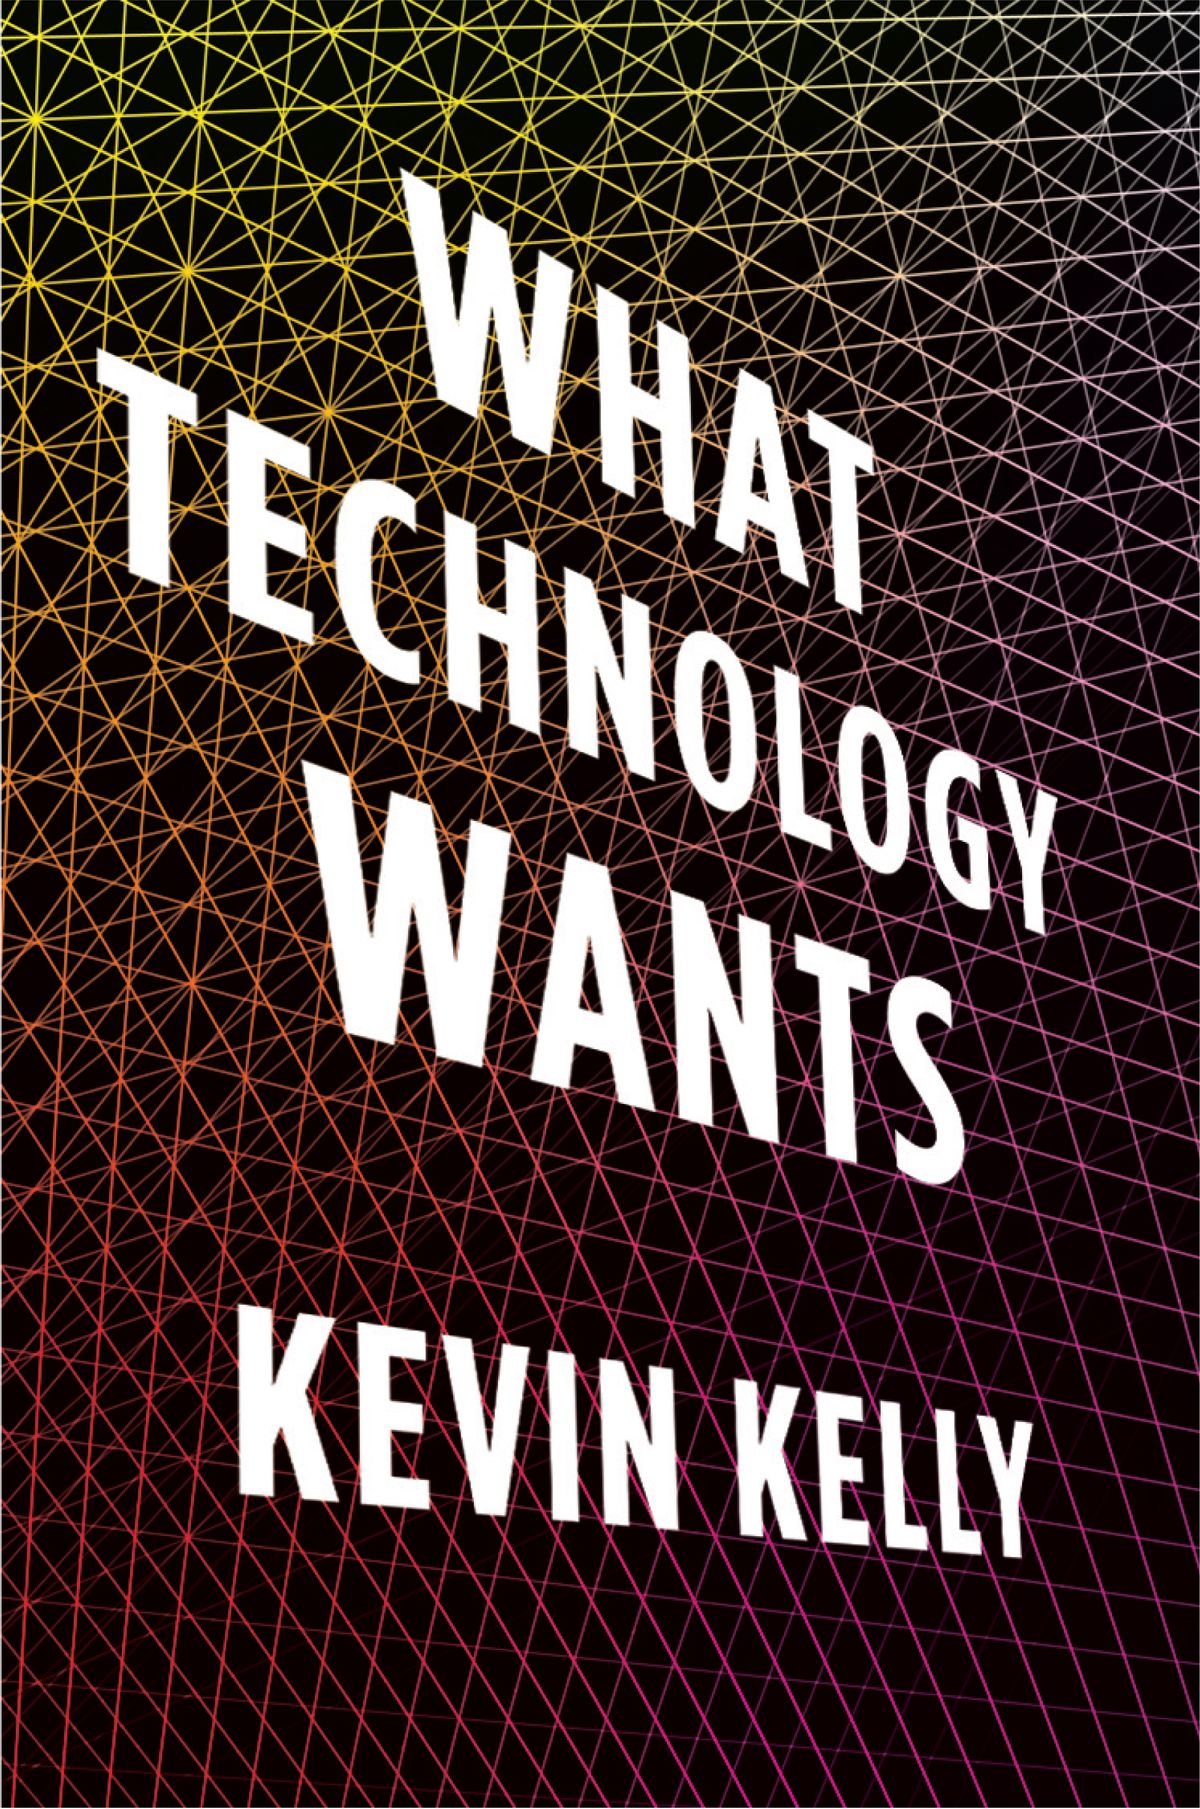 What Technology Wants, by Kevin Kelly